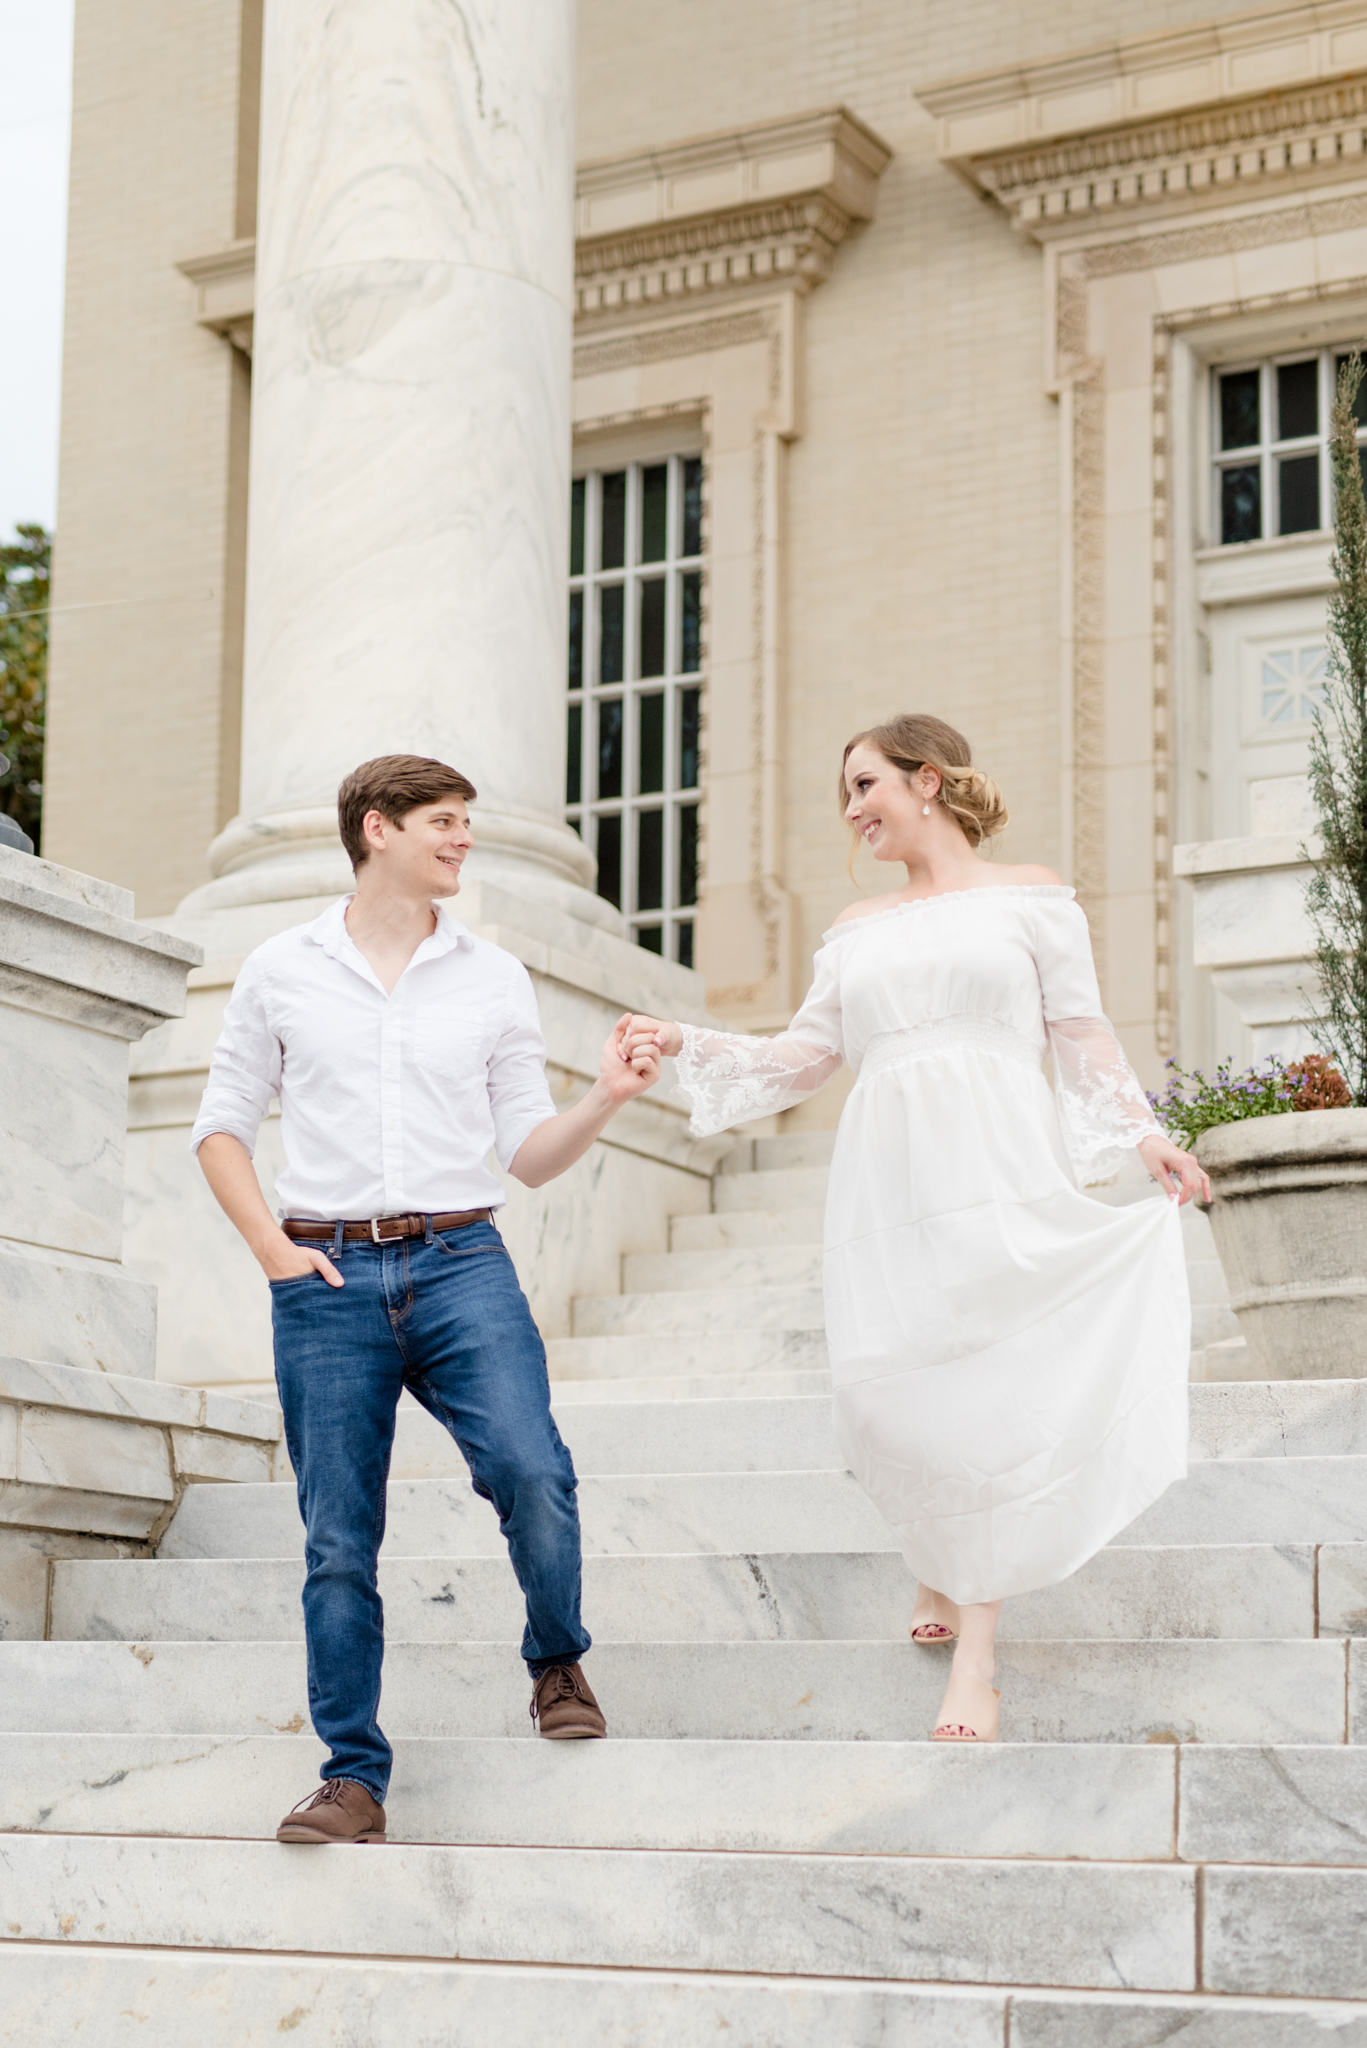 Engaged couple walks down marble staircase.